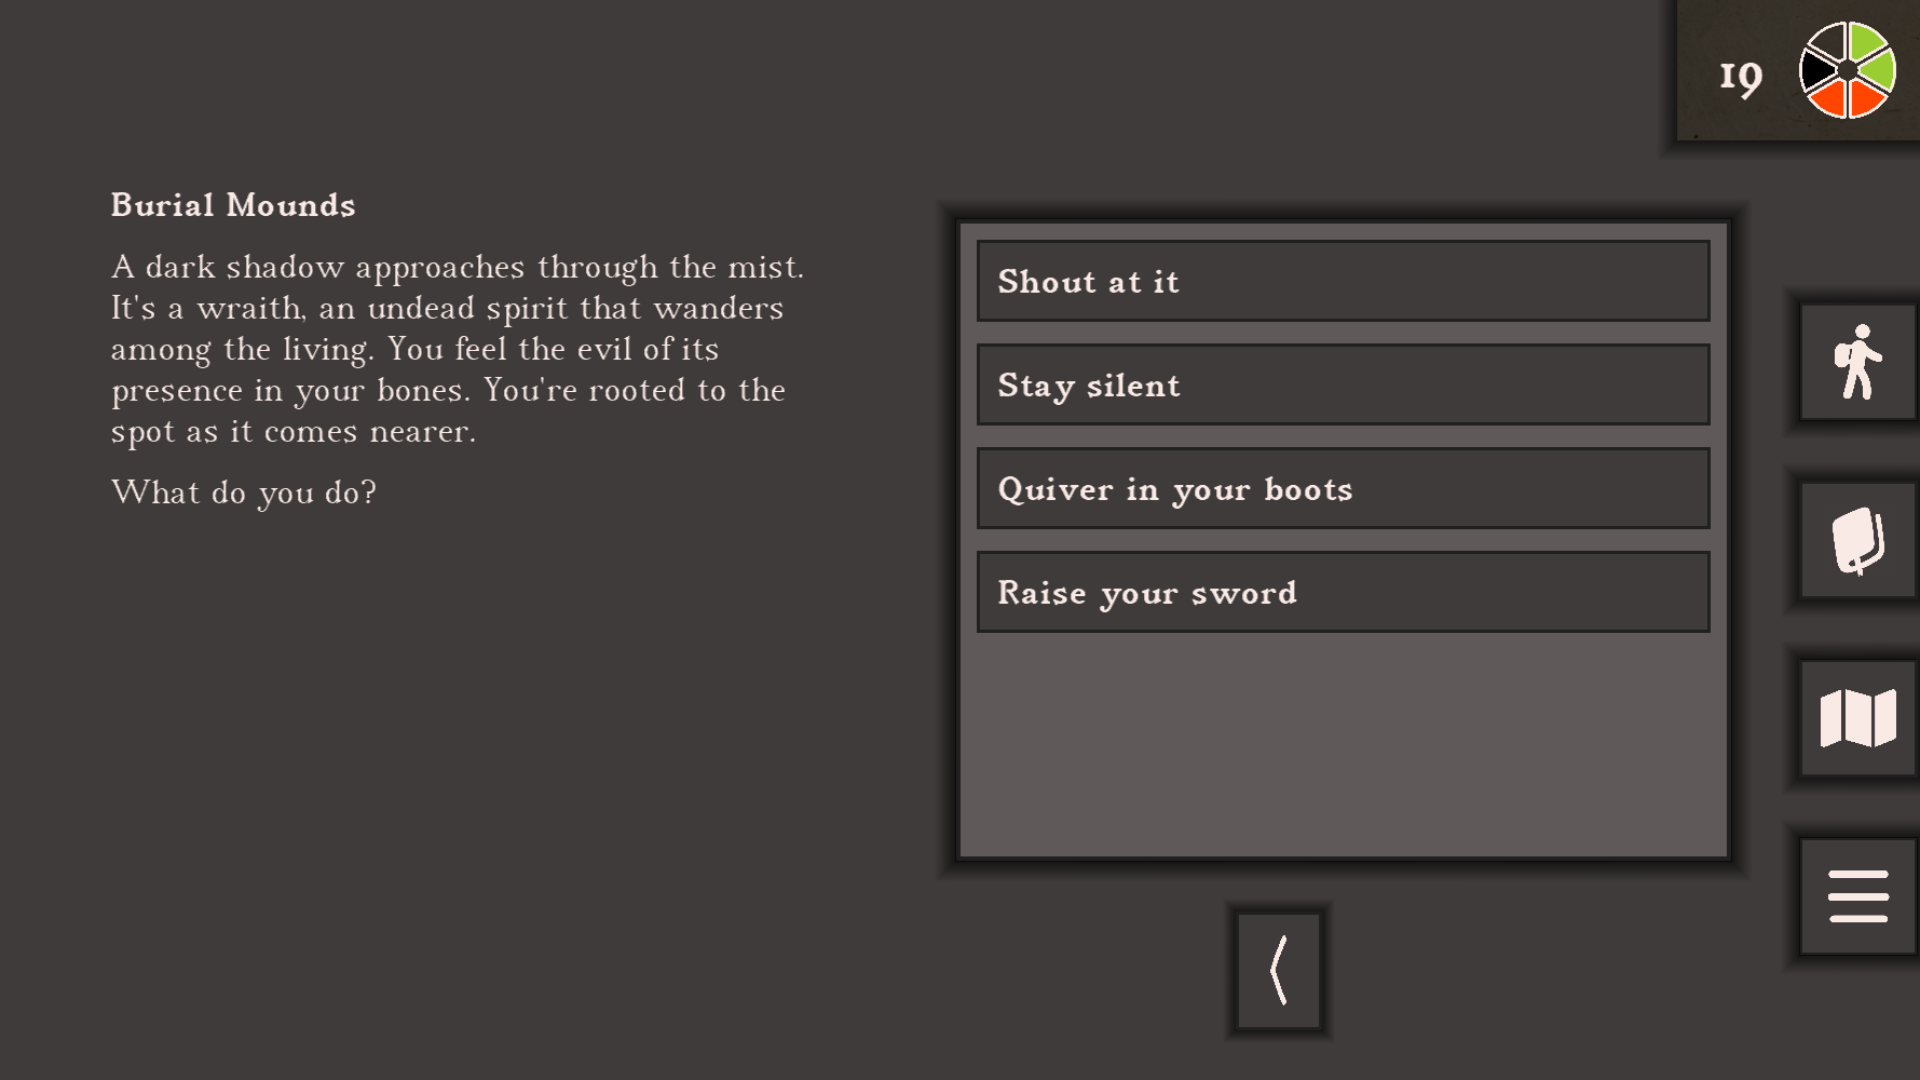 Screenshot of the wraith approaching the player, showing light text on a dark background instead of the usual dark text on light parchment.